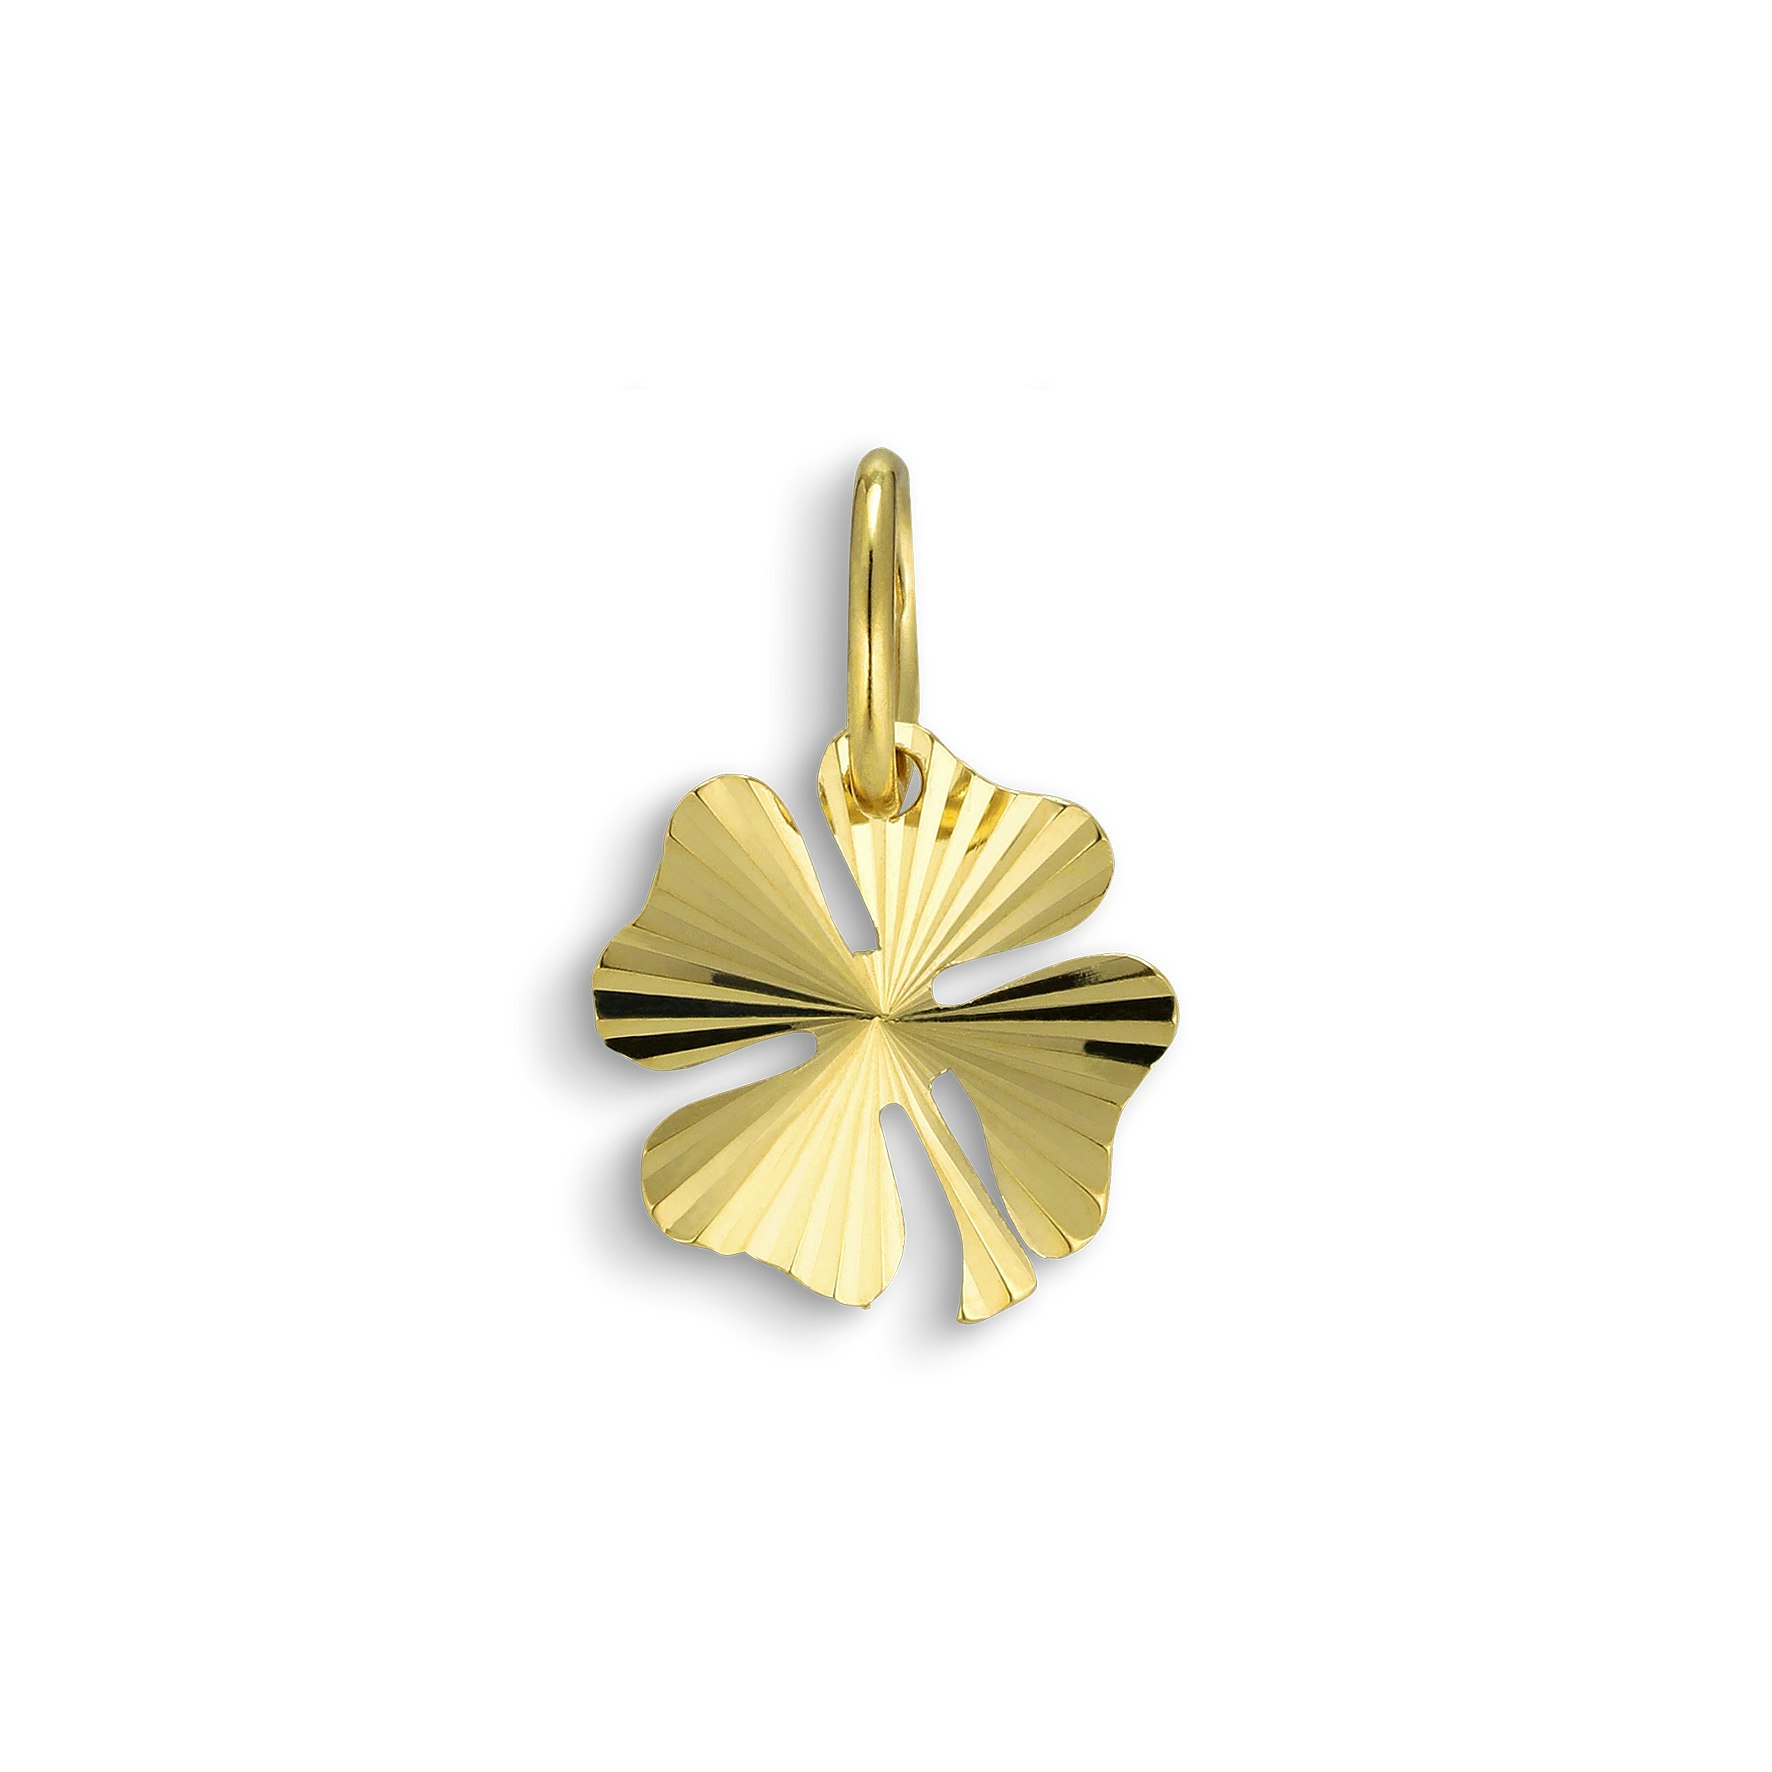 Reflection Clover Pendant from Jane Kønig in Goldplated Silver Sterling 925